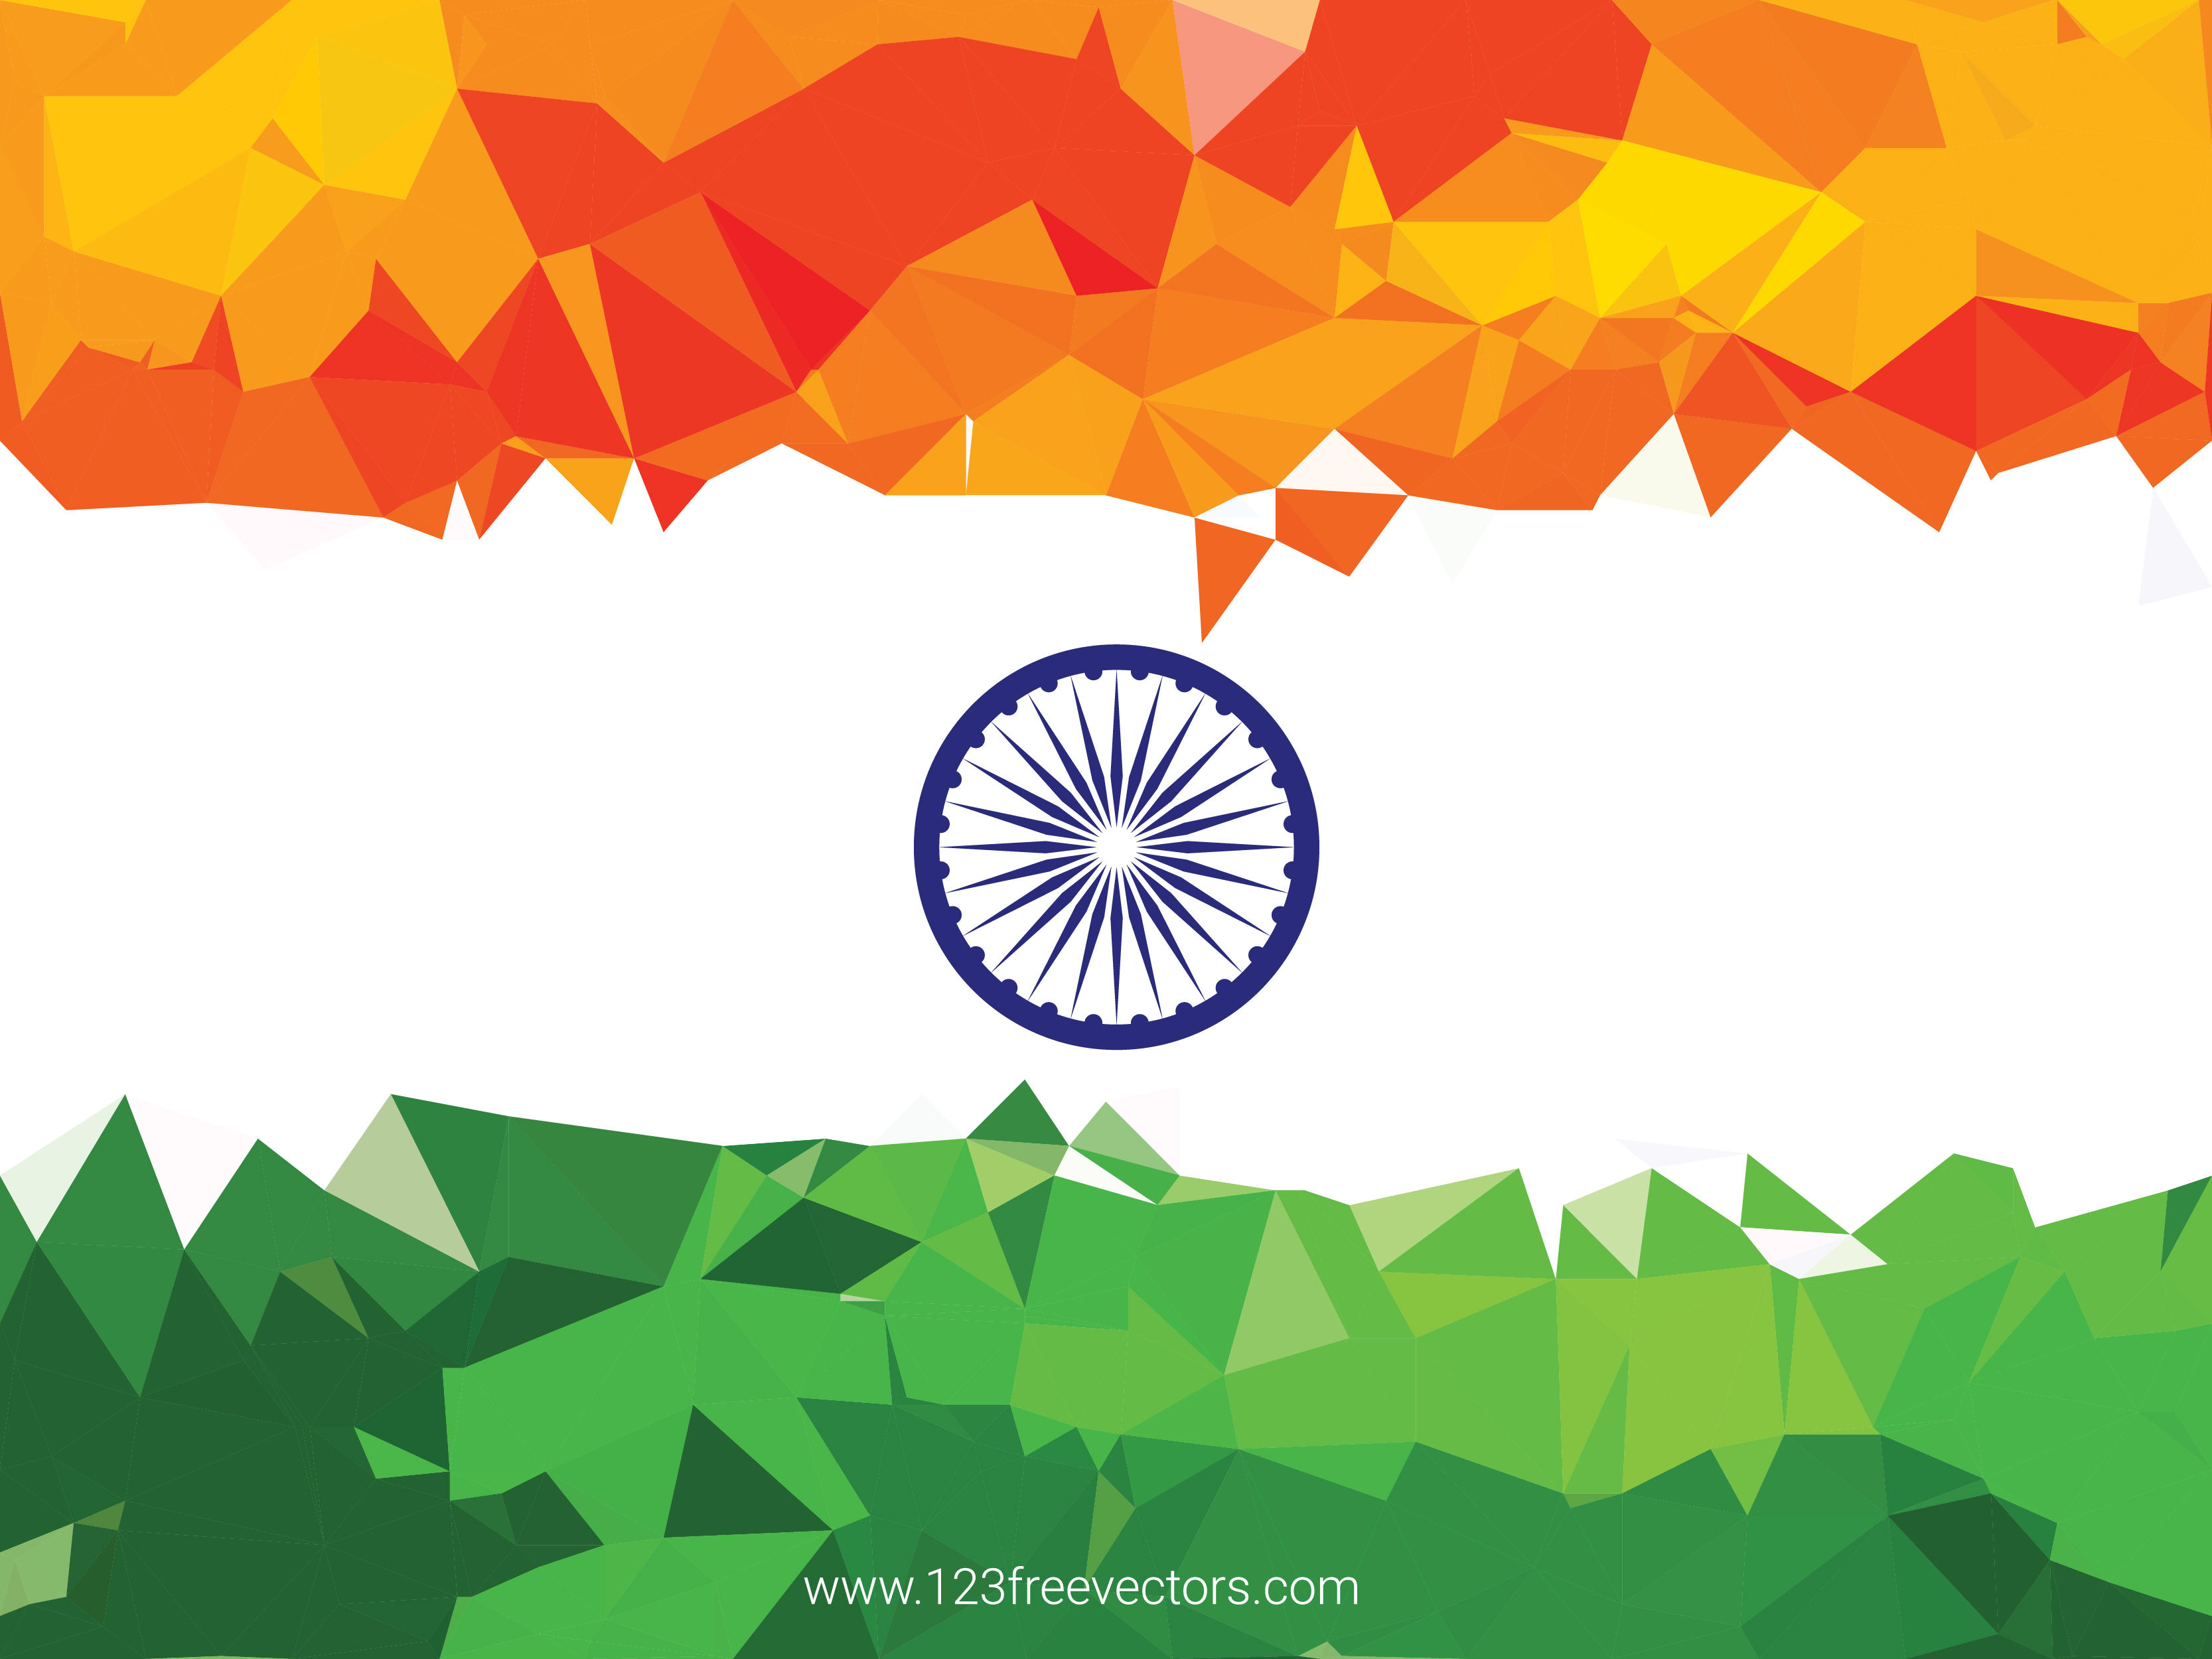 Indian Flag Theme Background For Indian Republic Day - Background Independence Day Theme - HD Wallpaper 